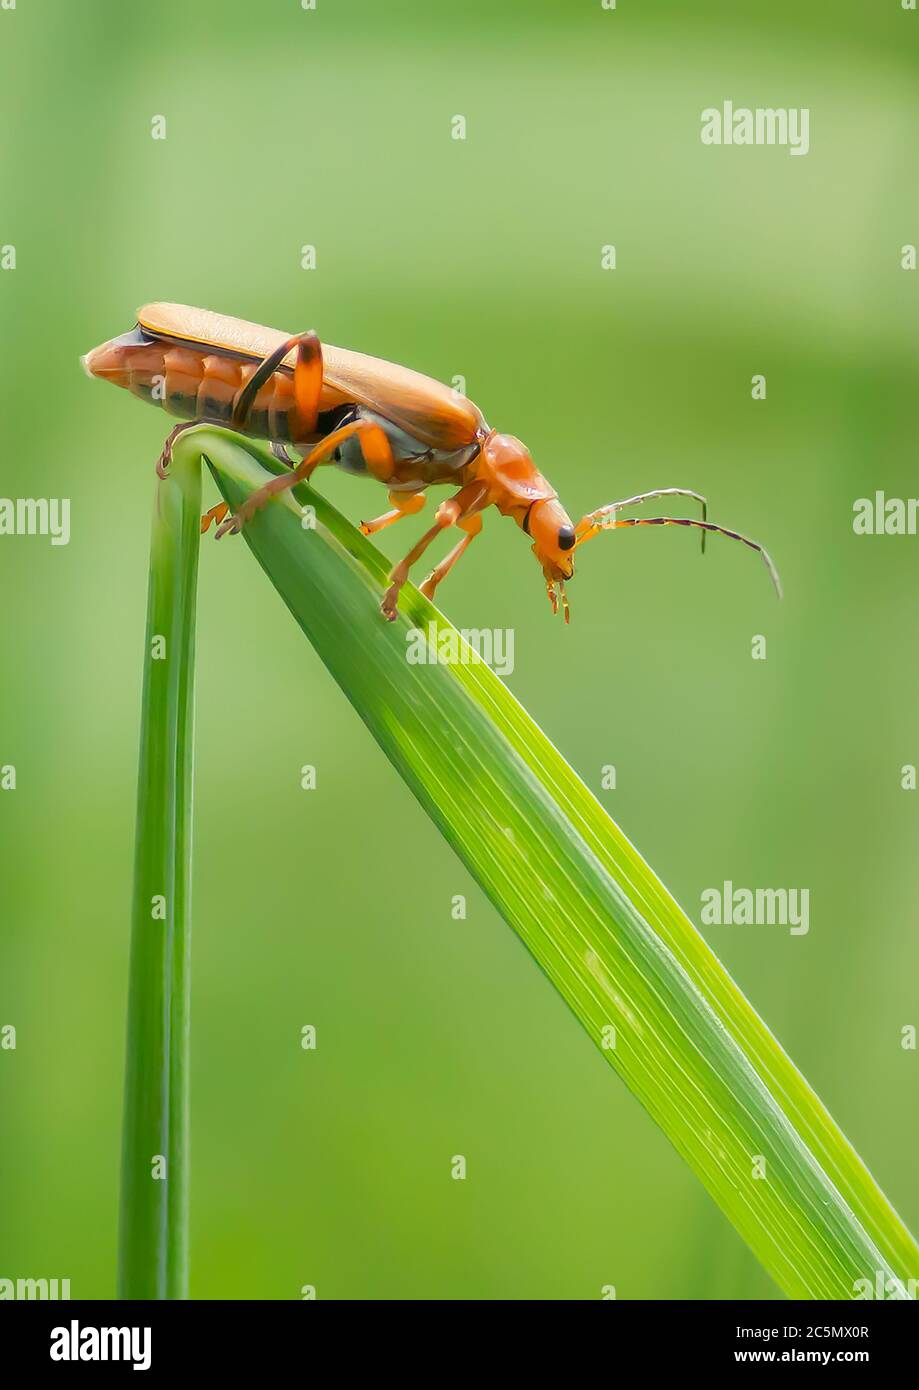 An Orange Soldier Beetle on a bend grass stem. Stock Photo